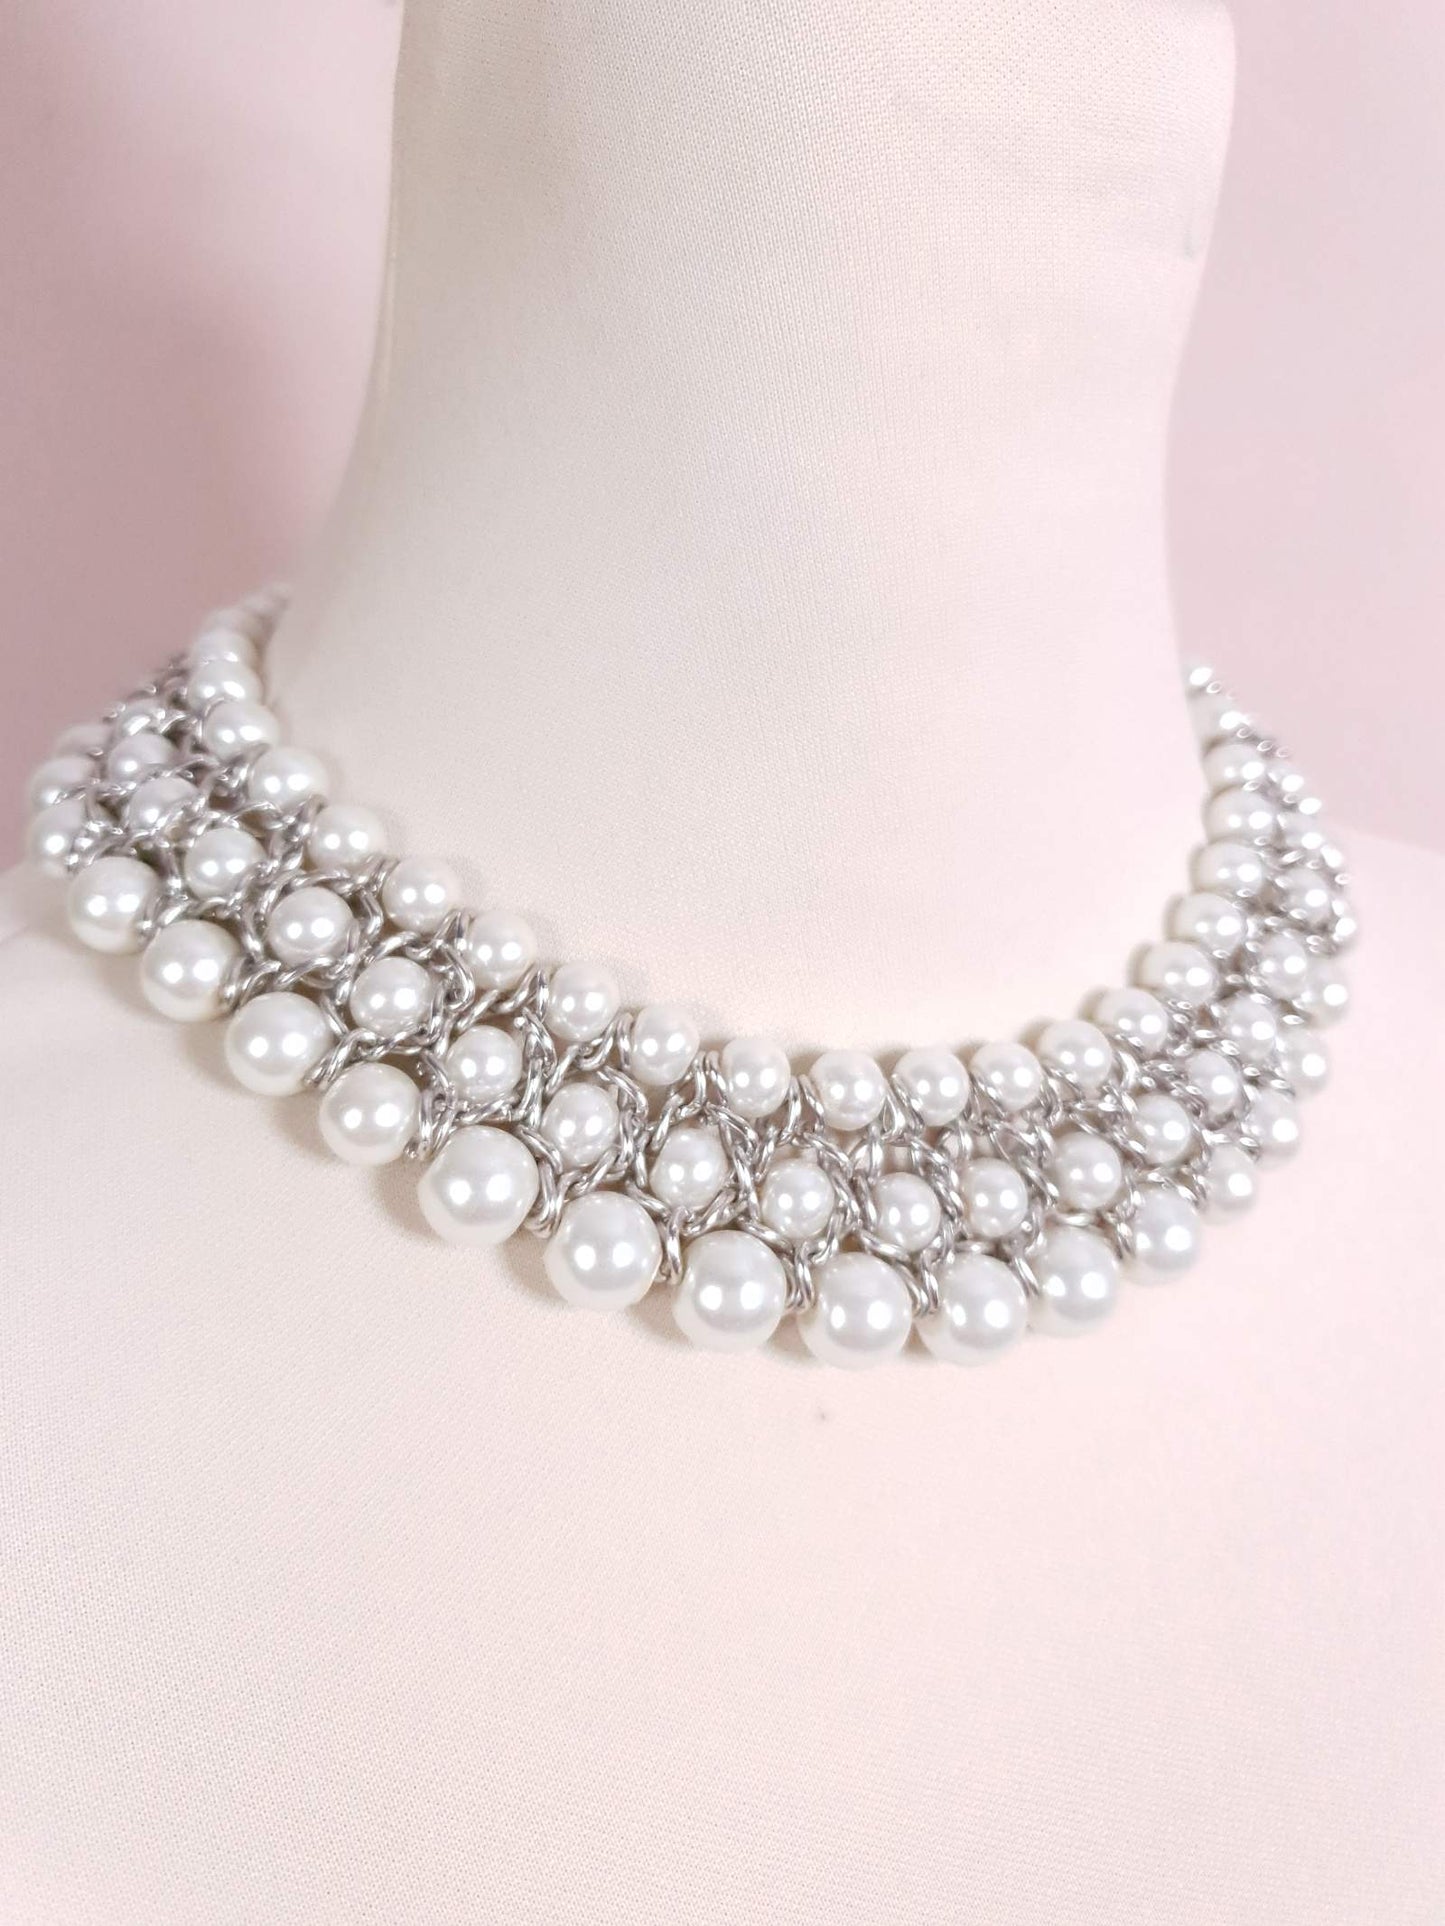 Pre-Loved Classic Three Row White Faux Pearl Necklace